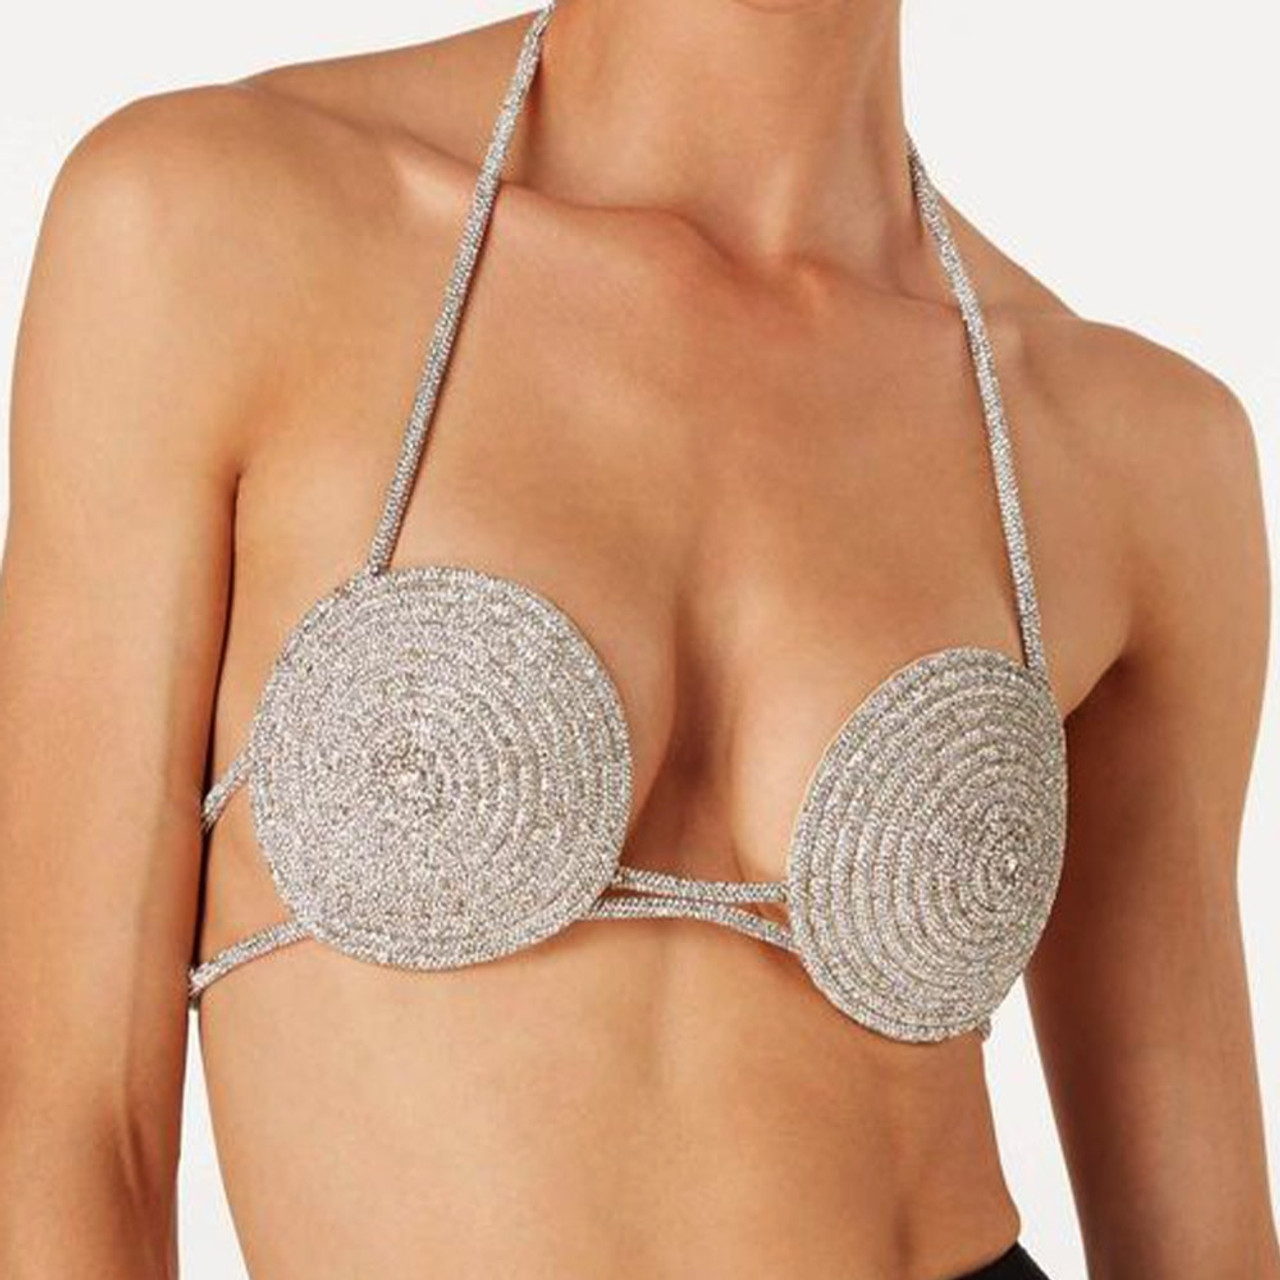 Round Crystal Bikini Top Cover Chest Body Chain For Women Shiny